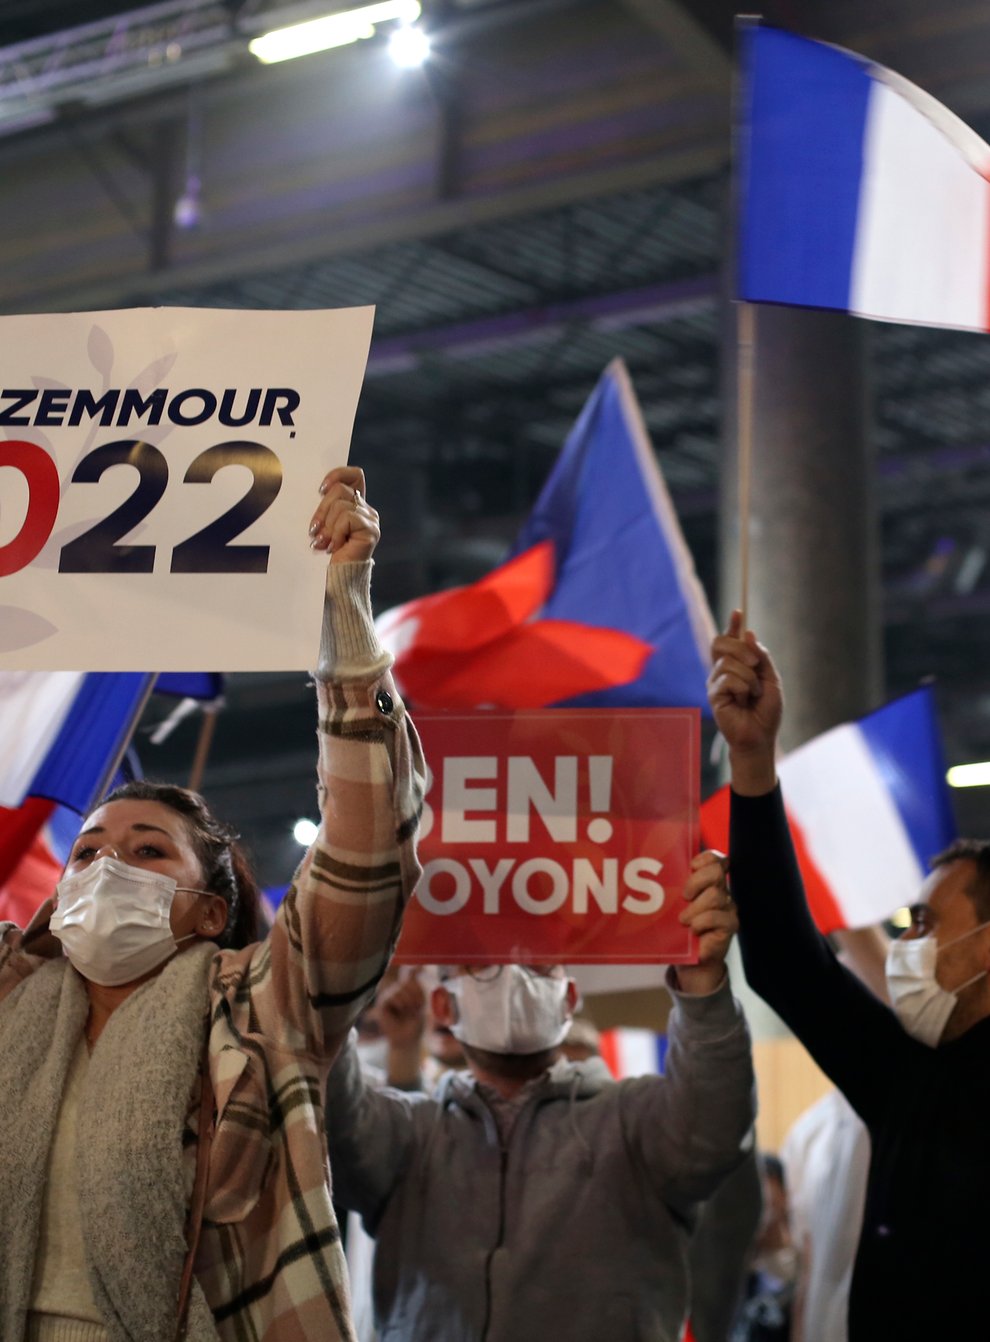 Supporters of French presidential candidate Eric Zemmour wave posters and flags during the candidate’s first rally (Rafael Yaghobzadeh/AP)